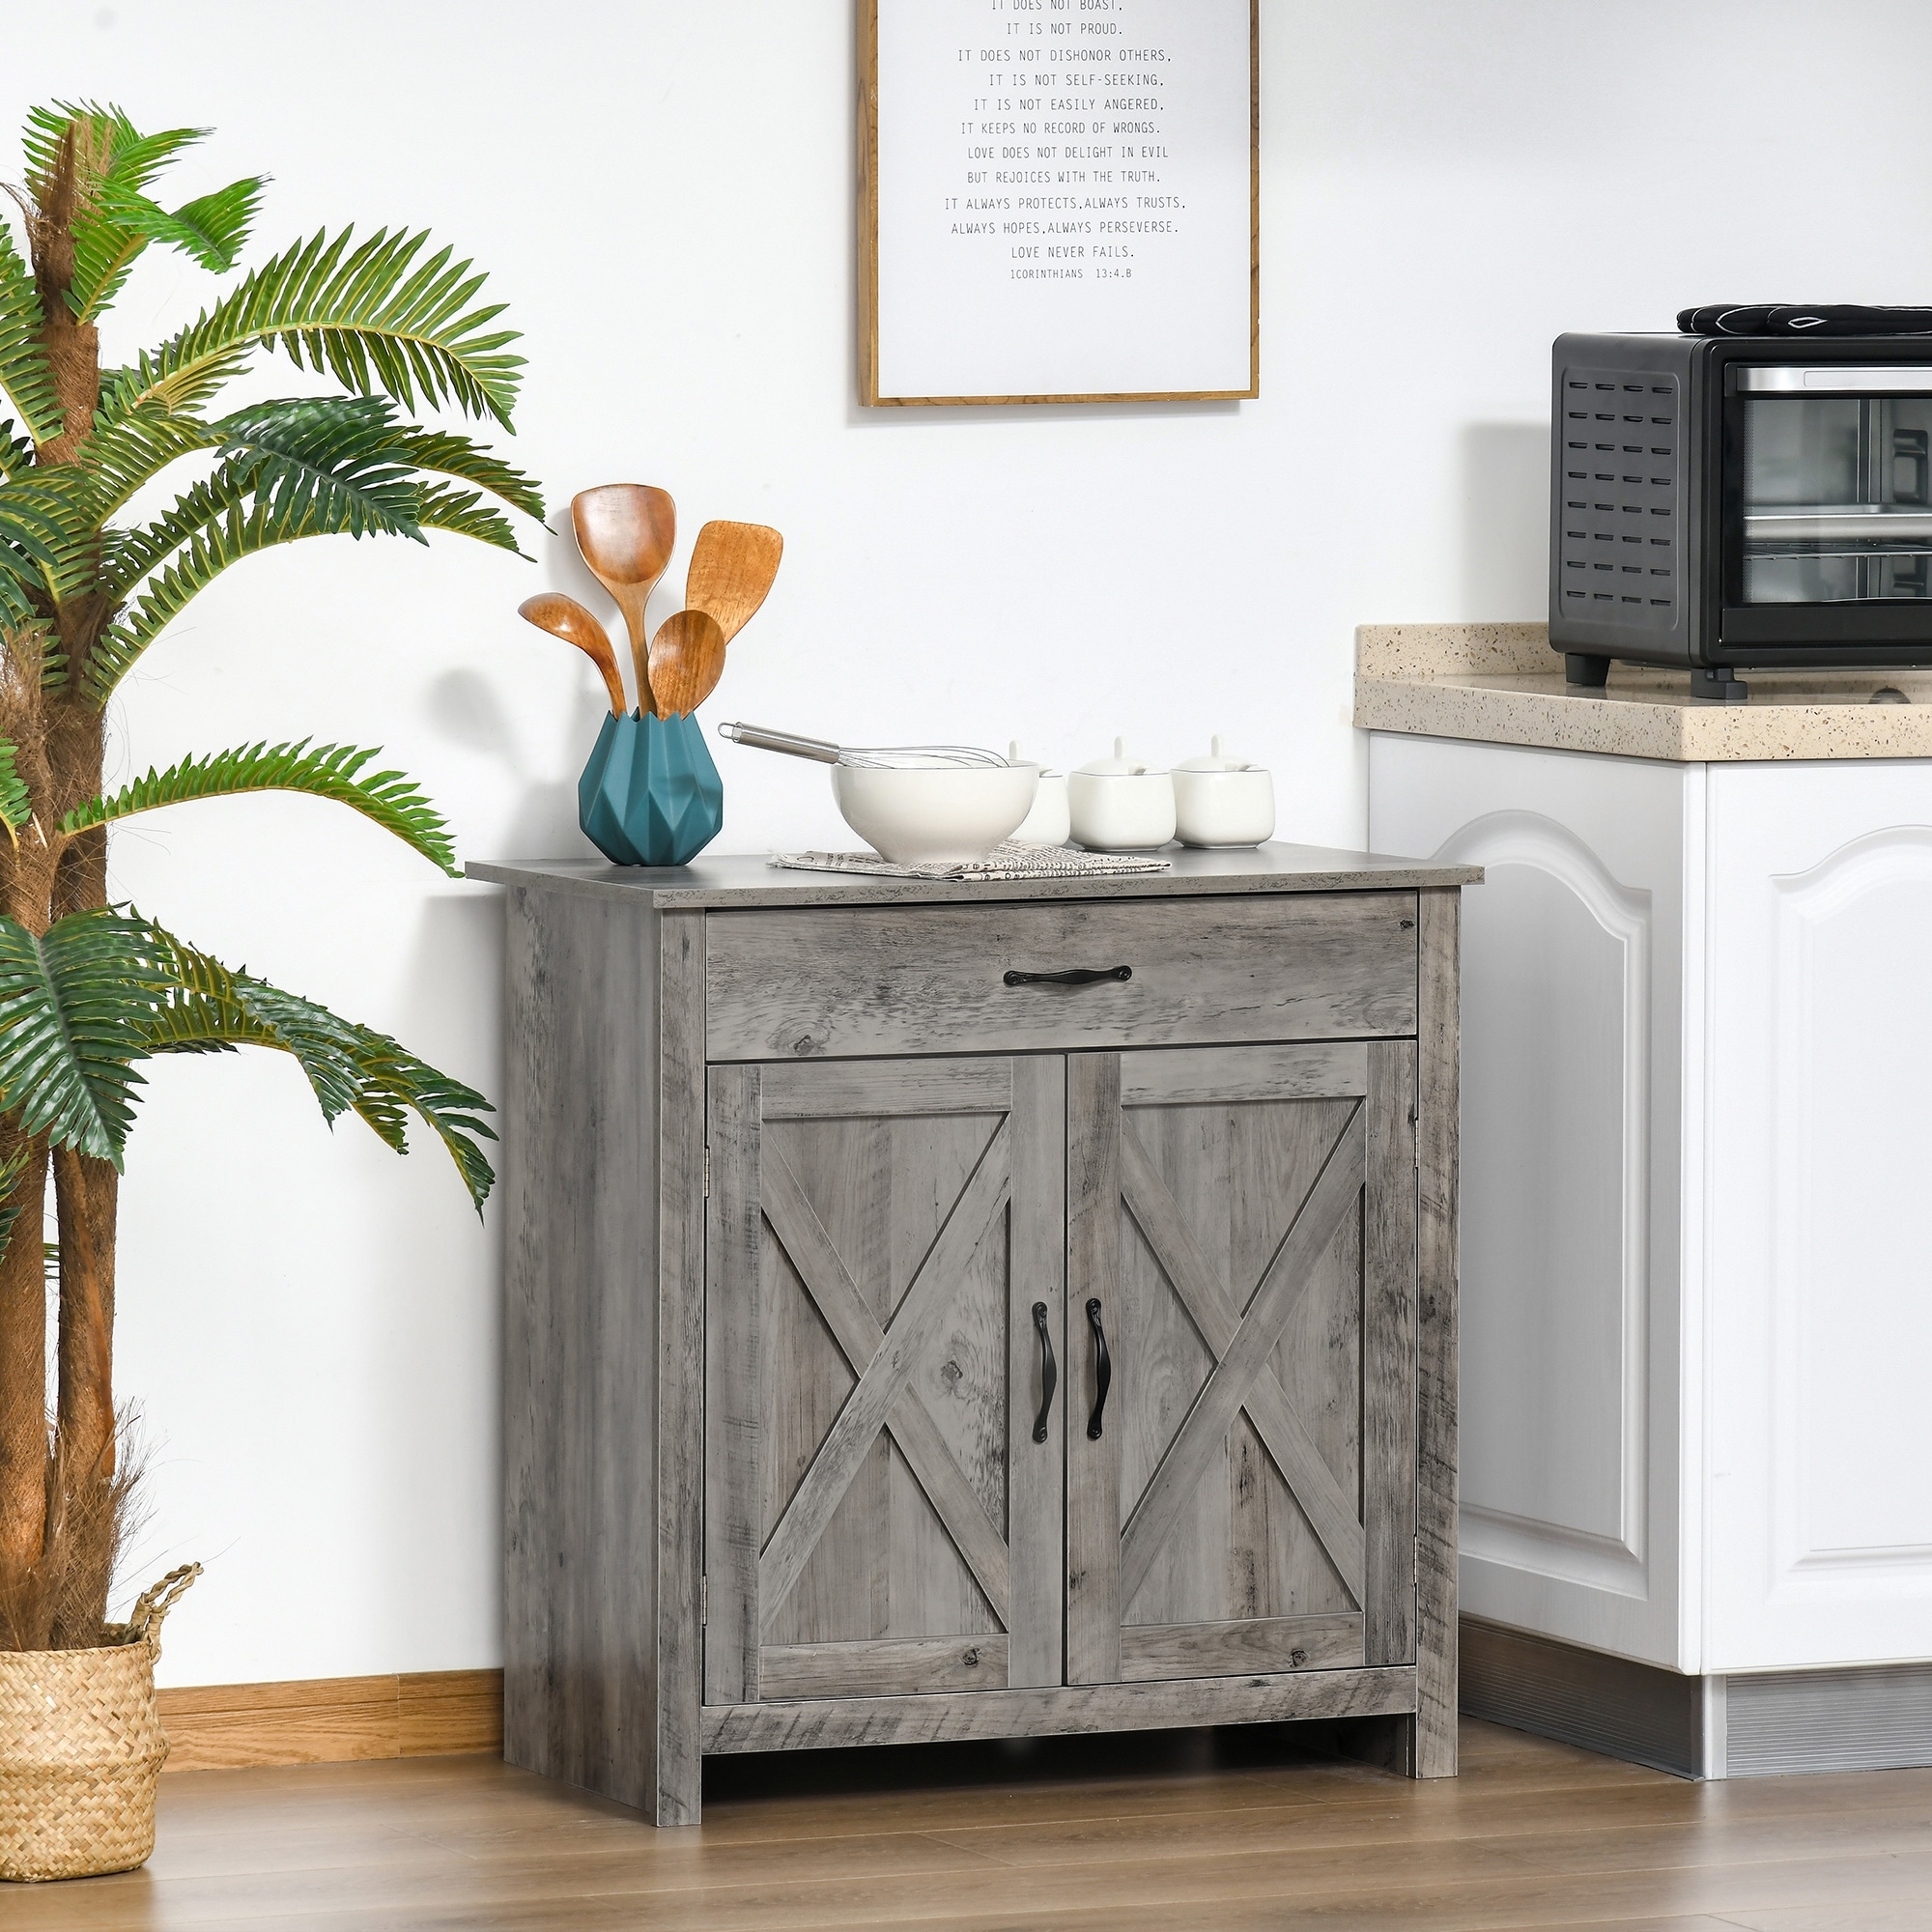 PHI VILLA Storage Cabinet with Baskets Rattan Cabinet with Drawers  Farmhouse Accent Cabinet for Bedroom Entryway, 2 Drawer and 4 Baskets  Accent Chest